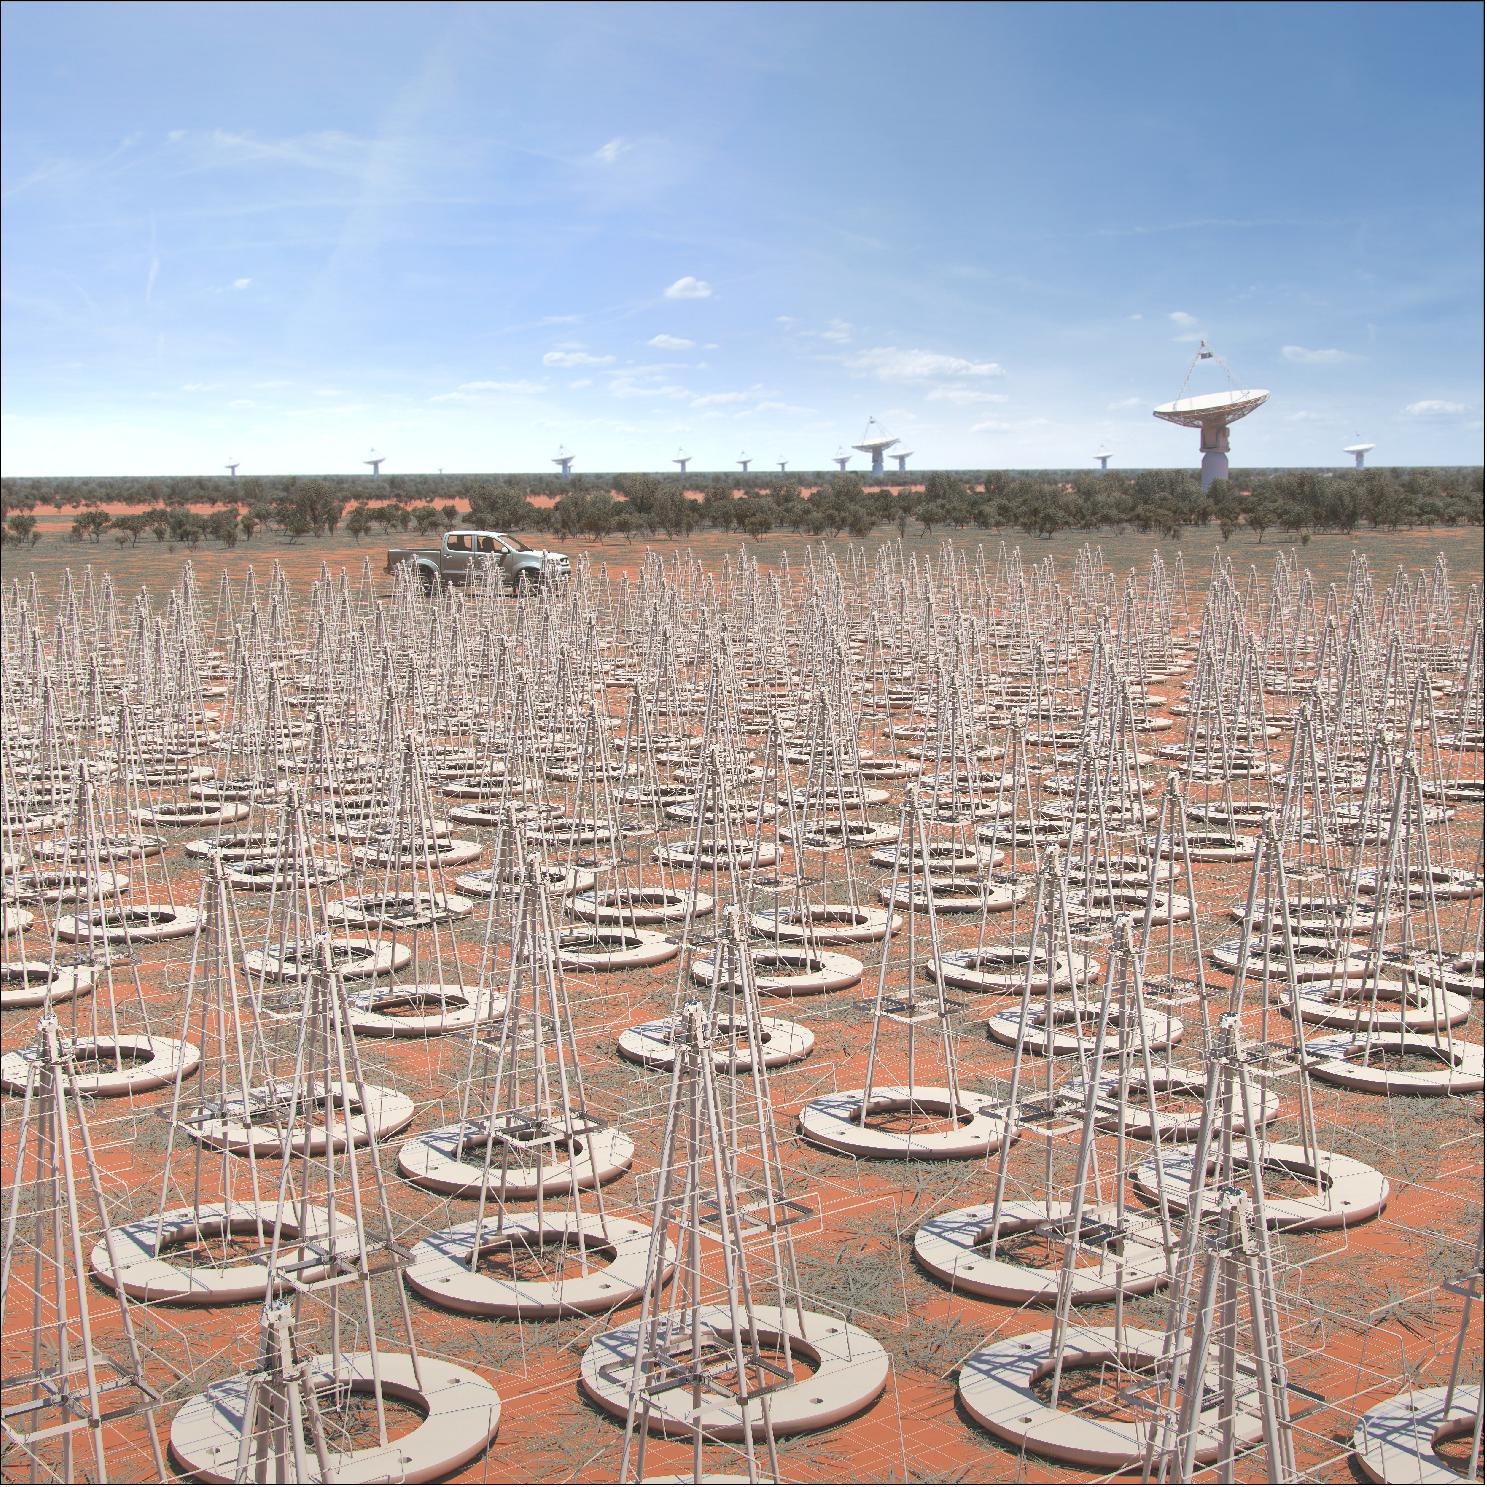 Figure 34: An artist impression of the low frequency antennas in Australia with the ASKAP telescope in the background (image credit: CSIRO)